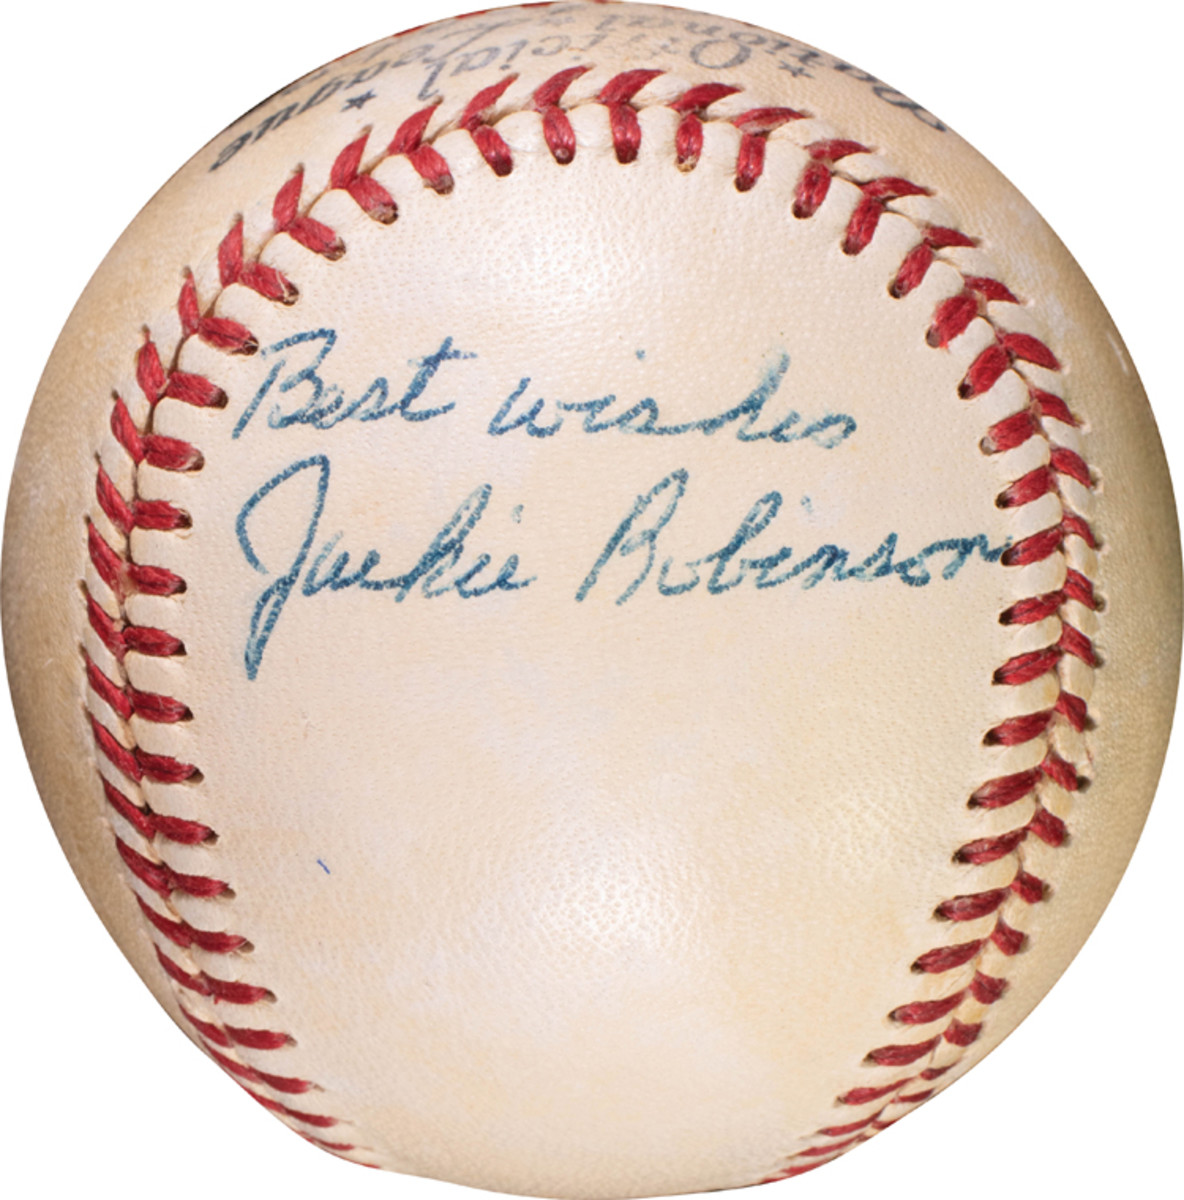 One of the GREATEST Pieces of SPORTS MEMORABILIA, EVER! - Jackie